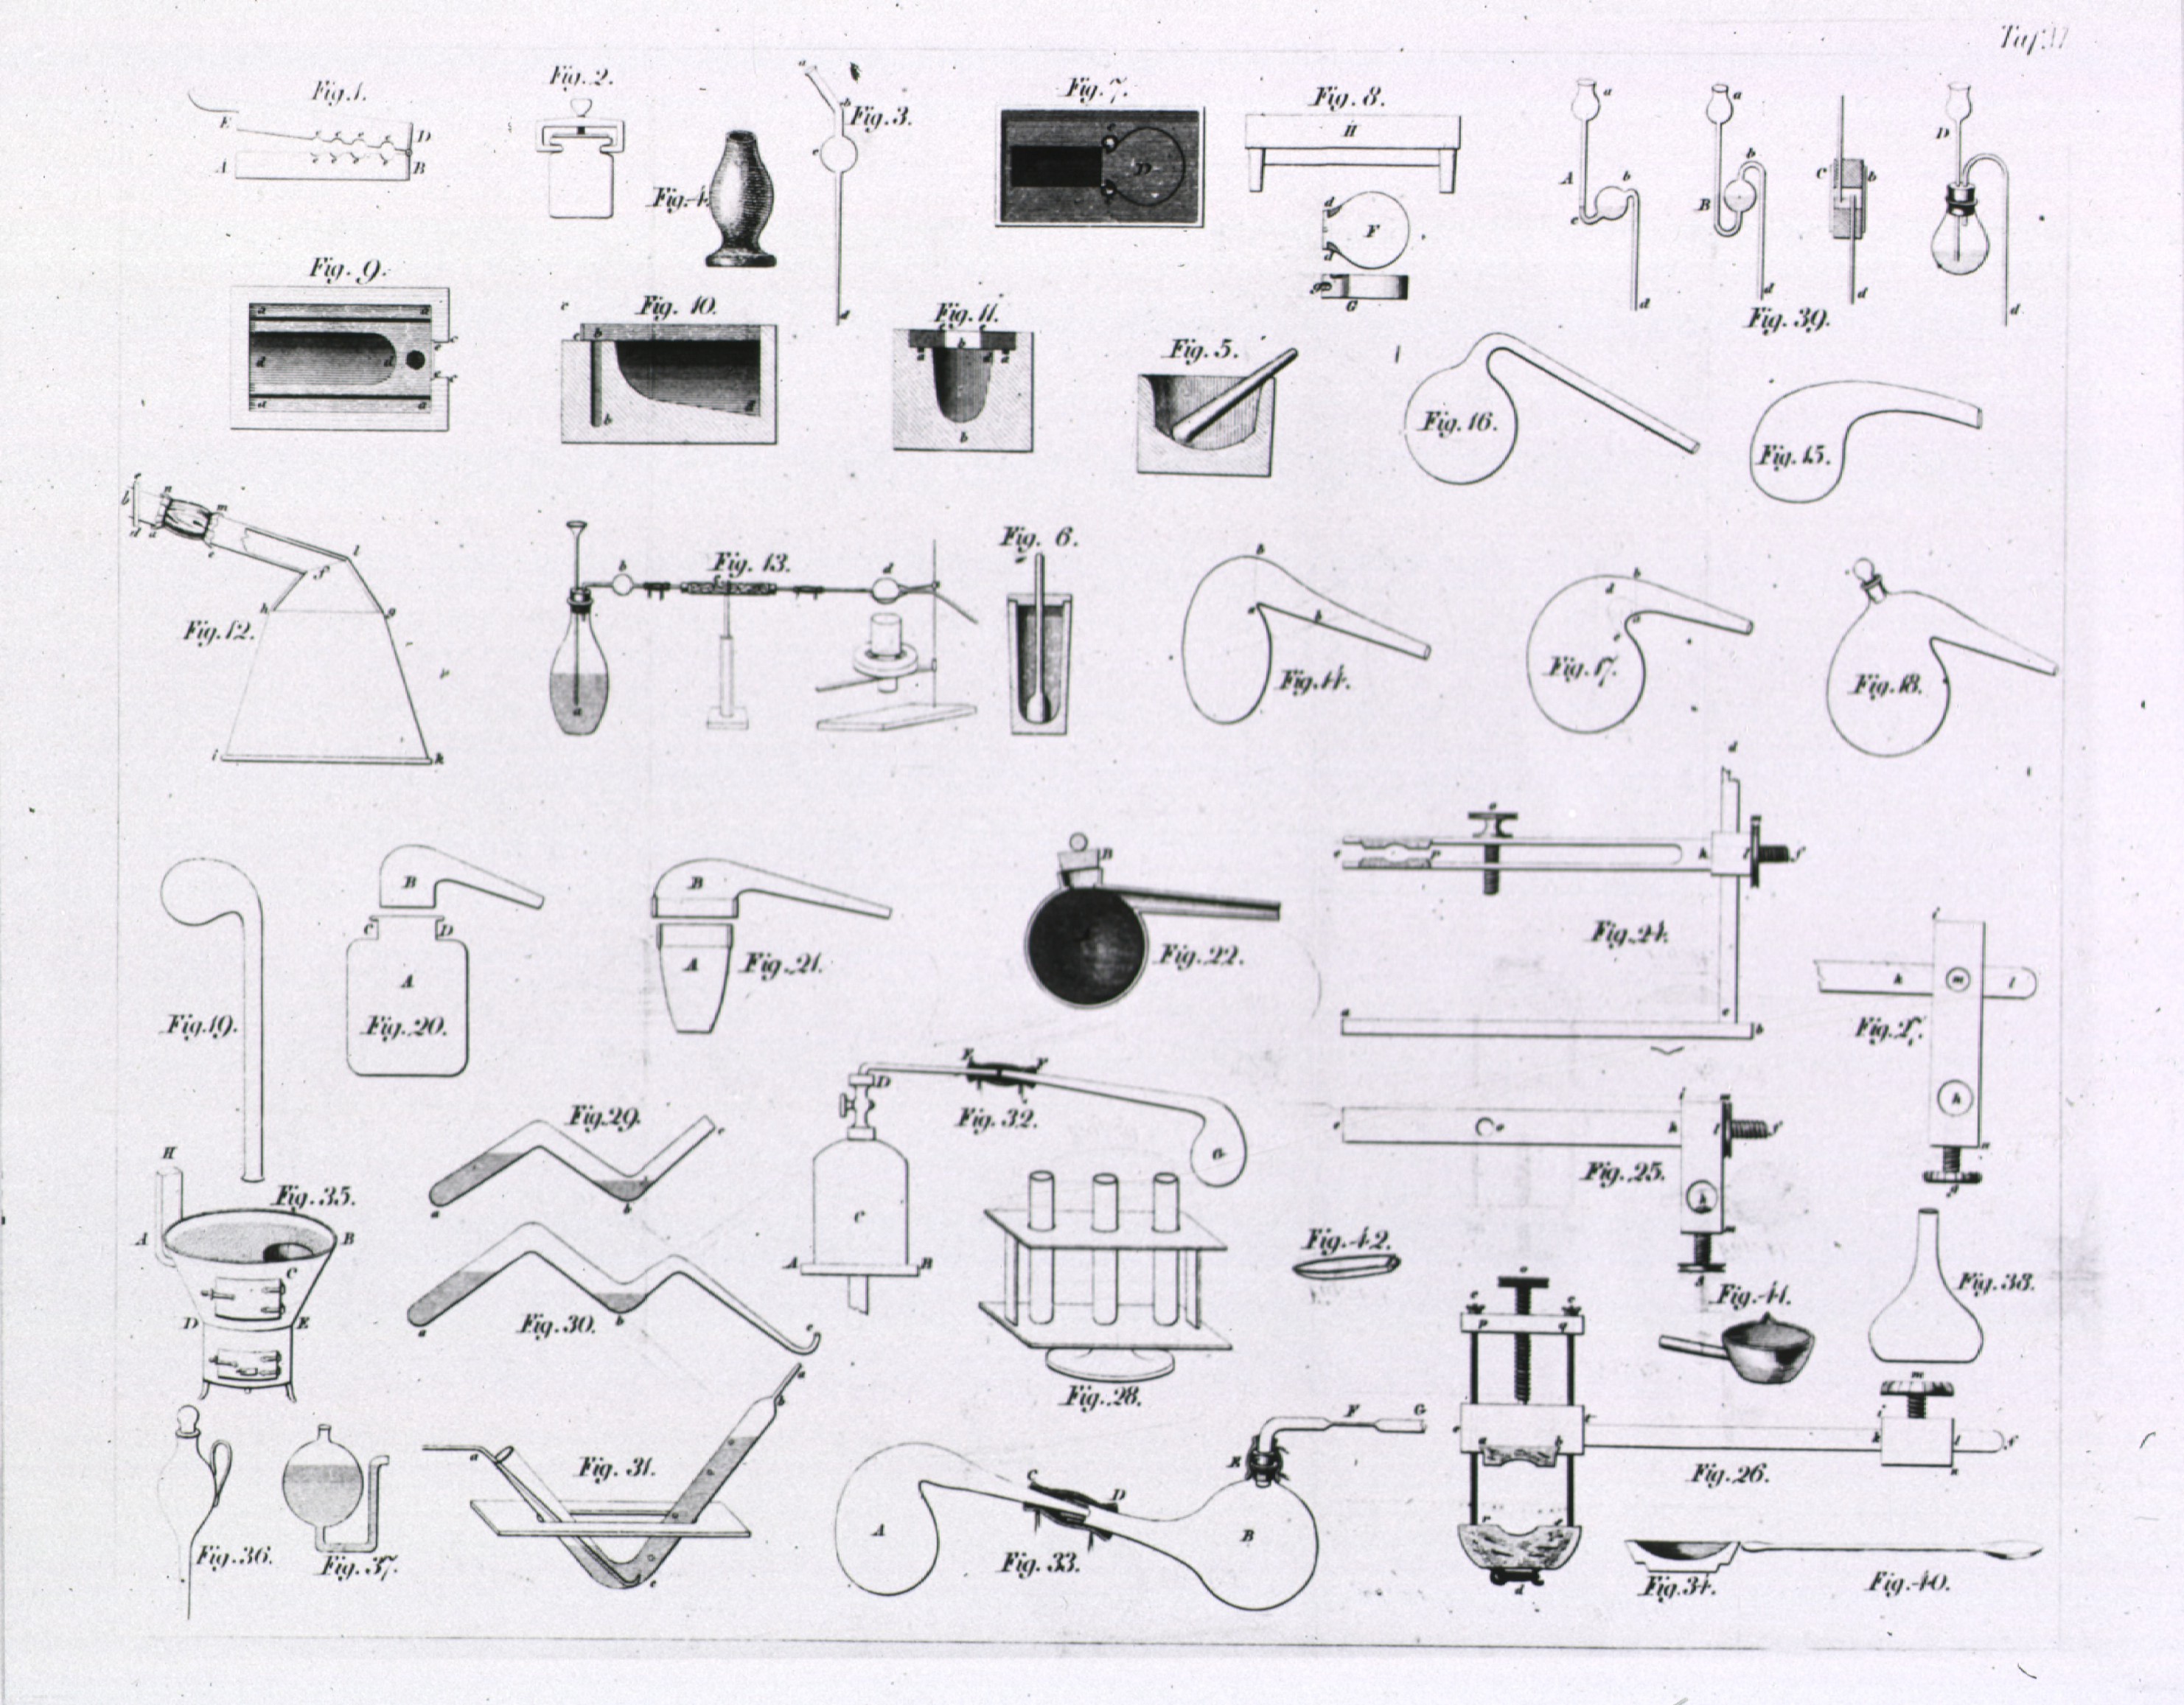 Black and white handdrawn images of scientific equipment.